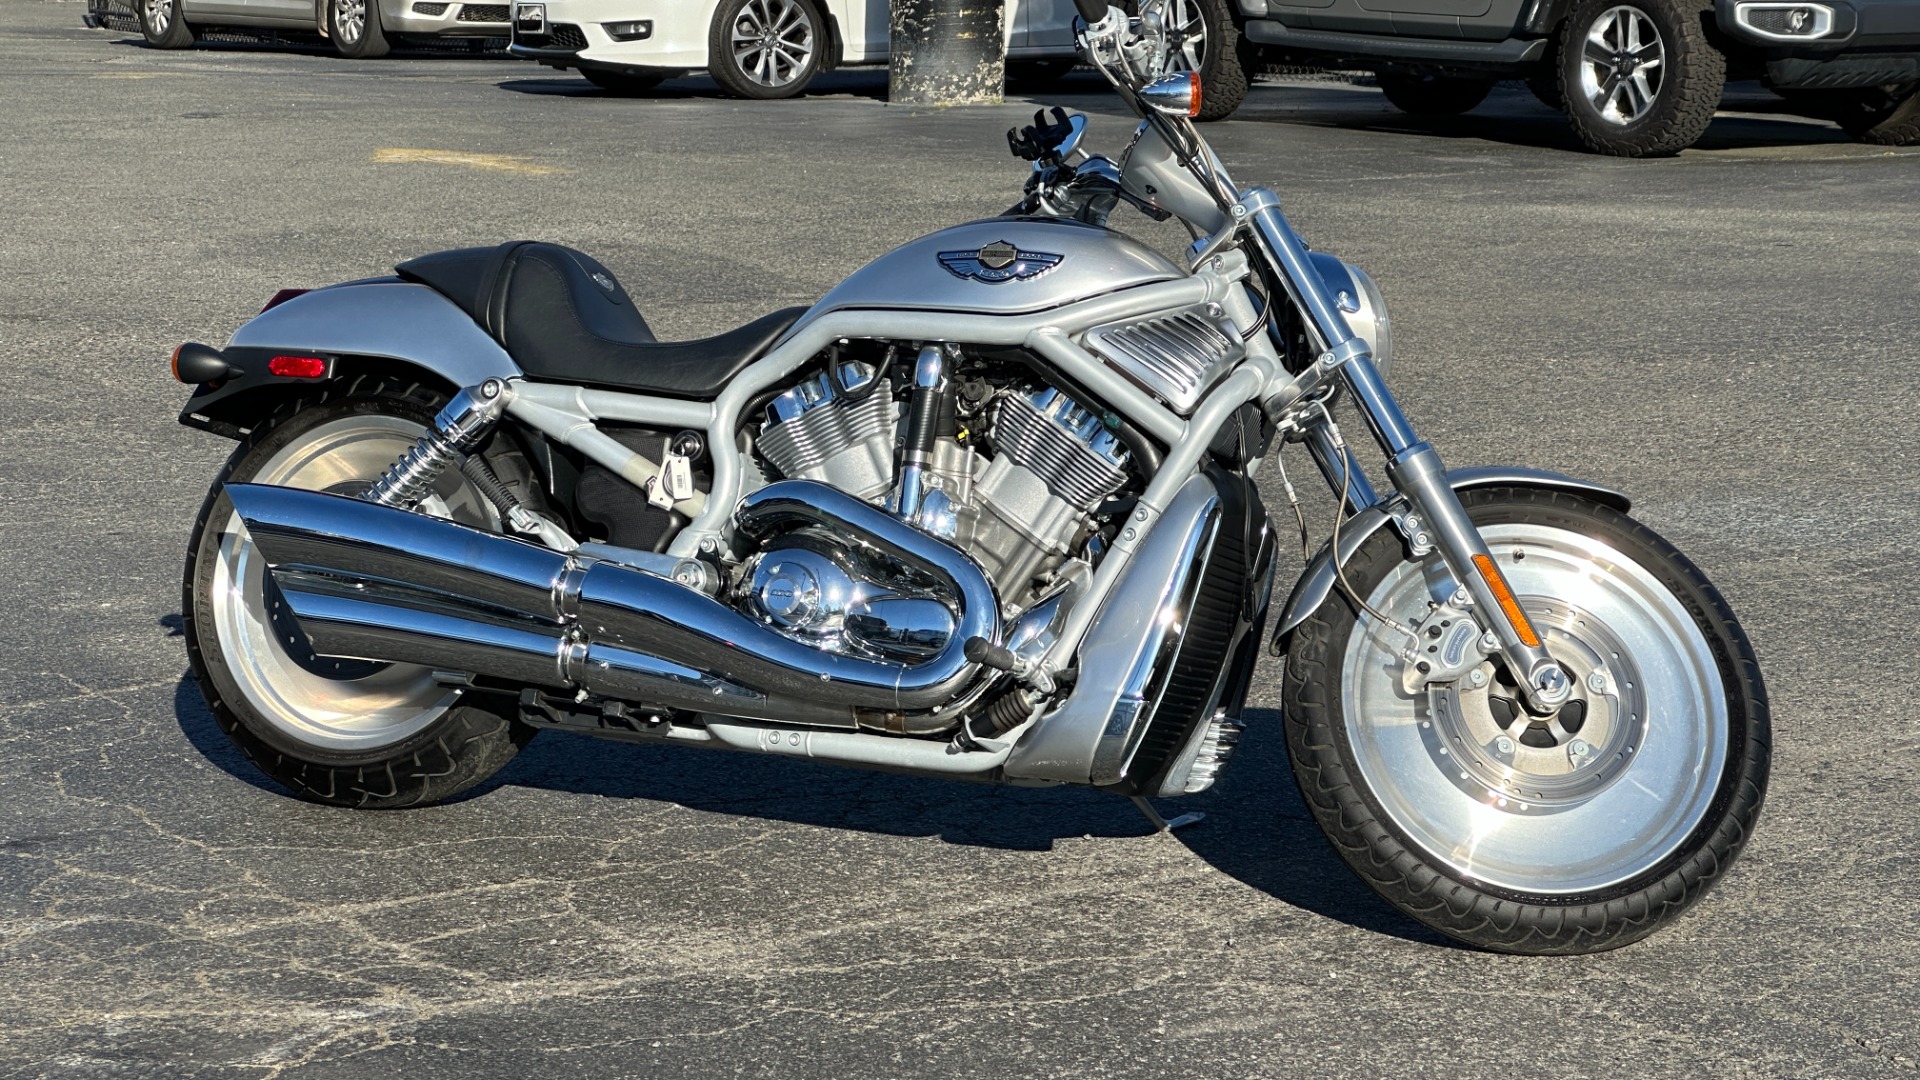 Used 2003 Harley Davidson V Rod ANNIVERSARY EDITION / 1130CC ENGINE / BREMBO BRAKES / VORTEX AIR SCOOPS for sale $7,995 at Formula Imports in Charlotte NC 28227 62